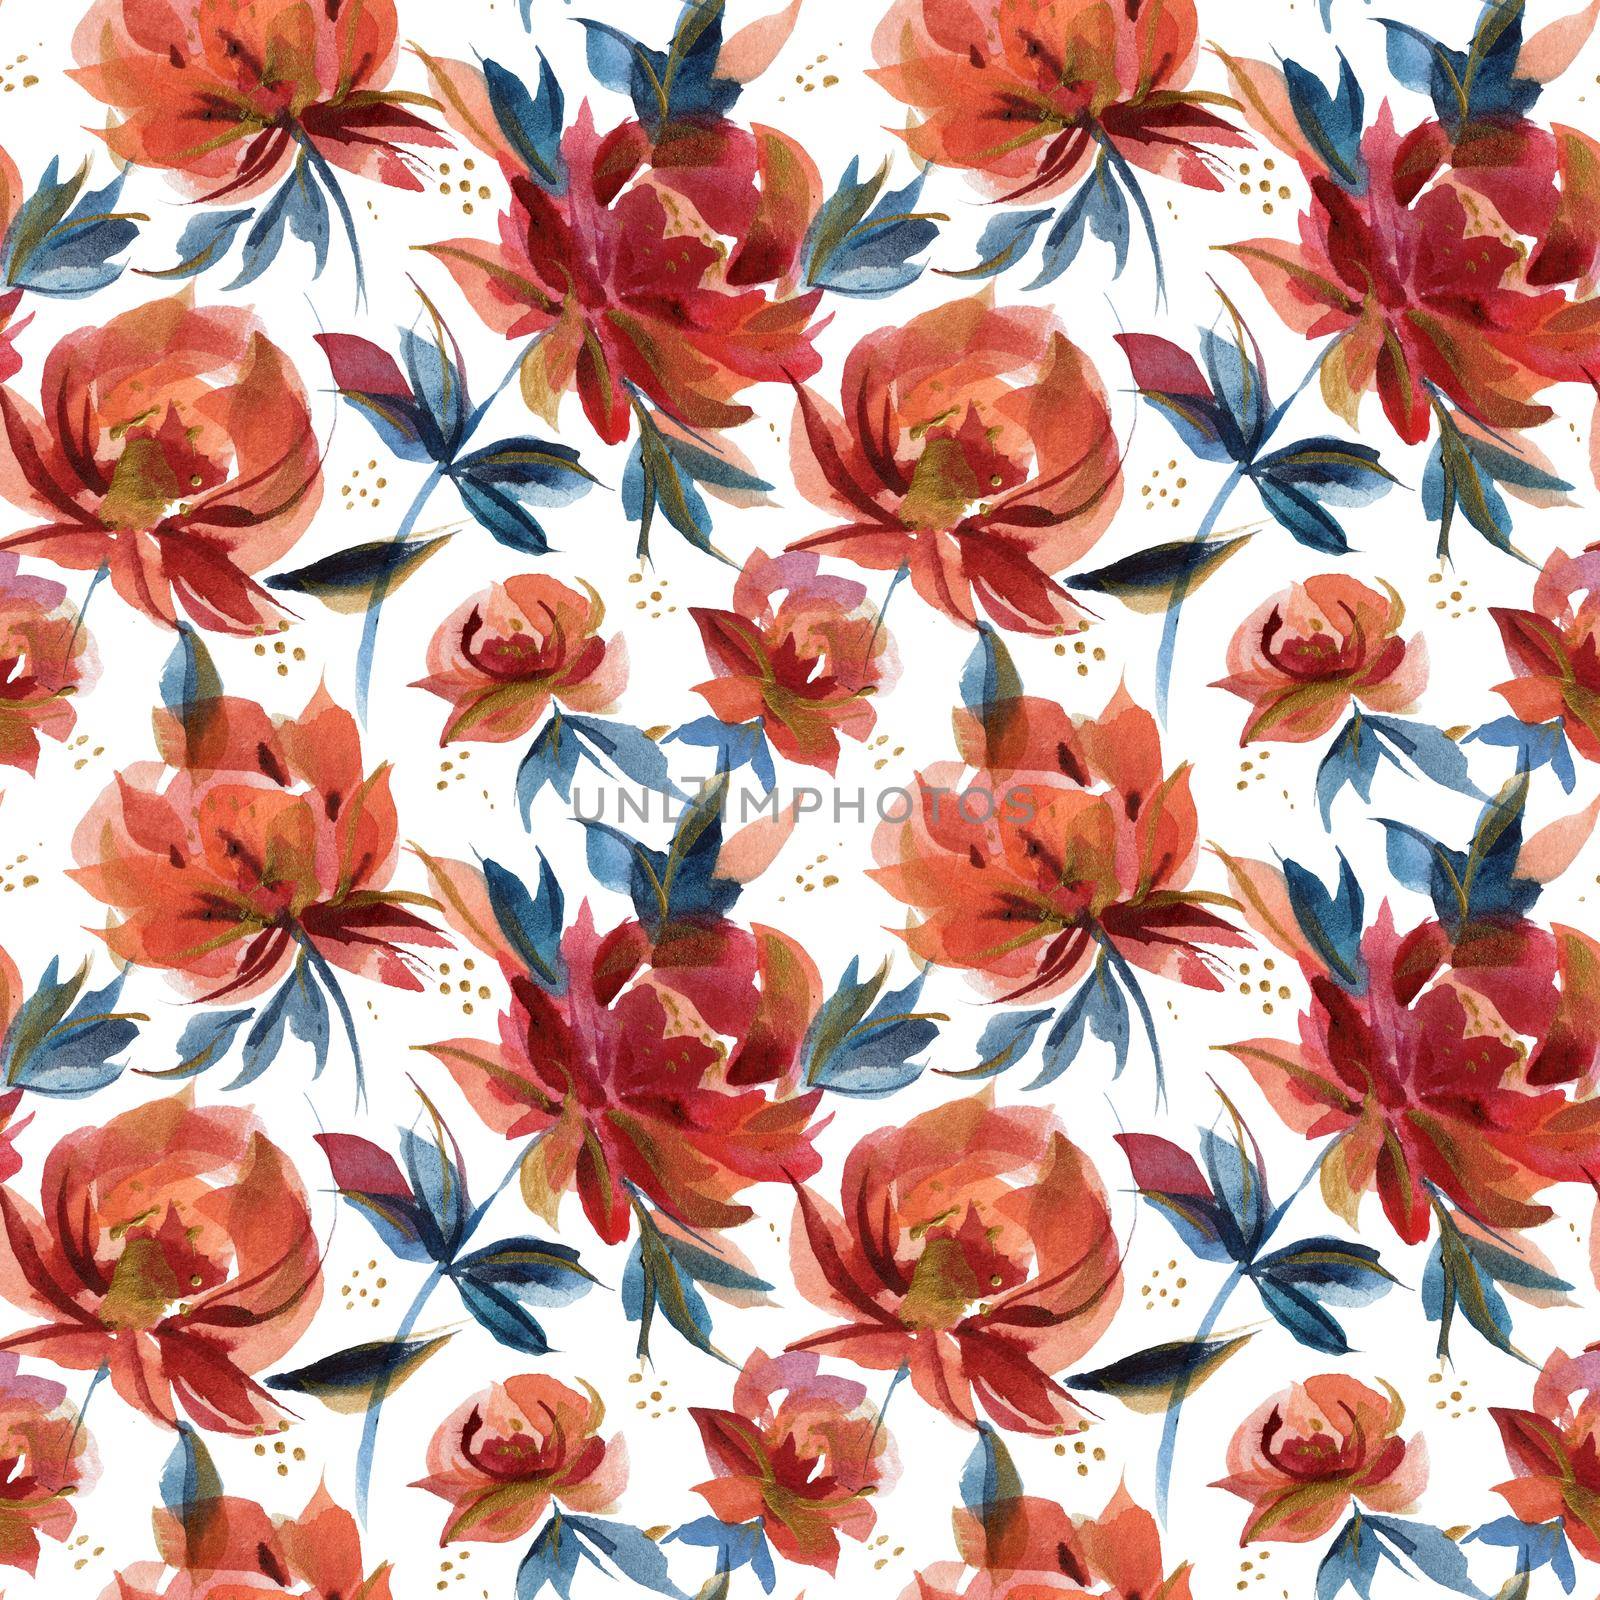 Cintz seamless pattern with blue and orange folk roses by Xeniasnowstorm